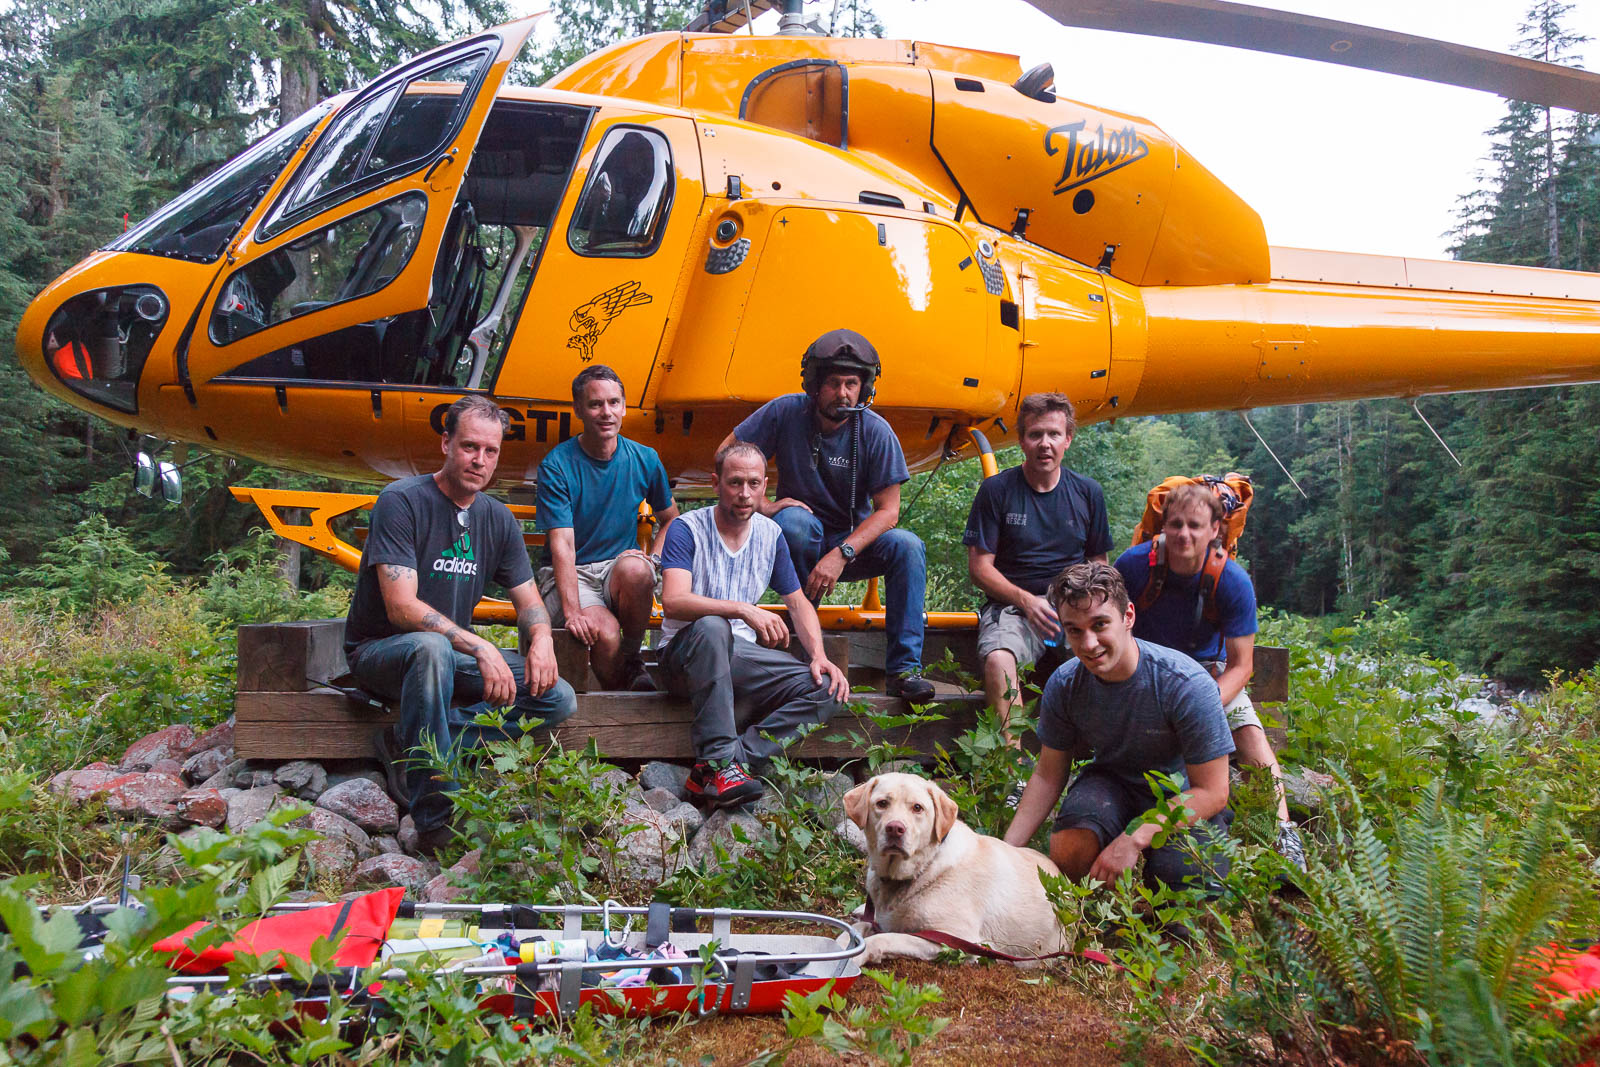 Exhausted dog needs a little help from North Shore Rescue - image